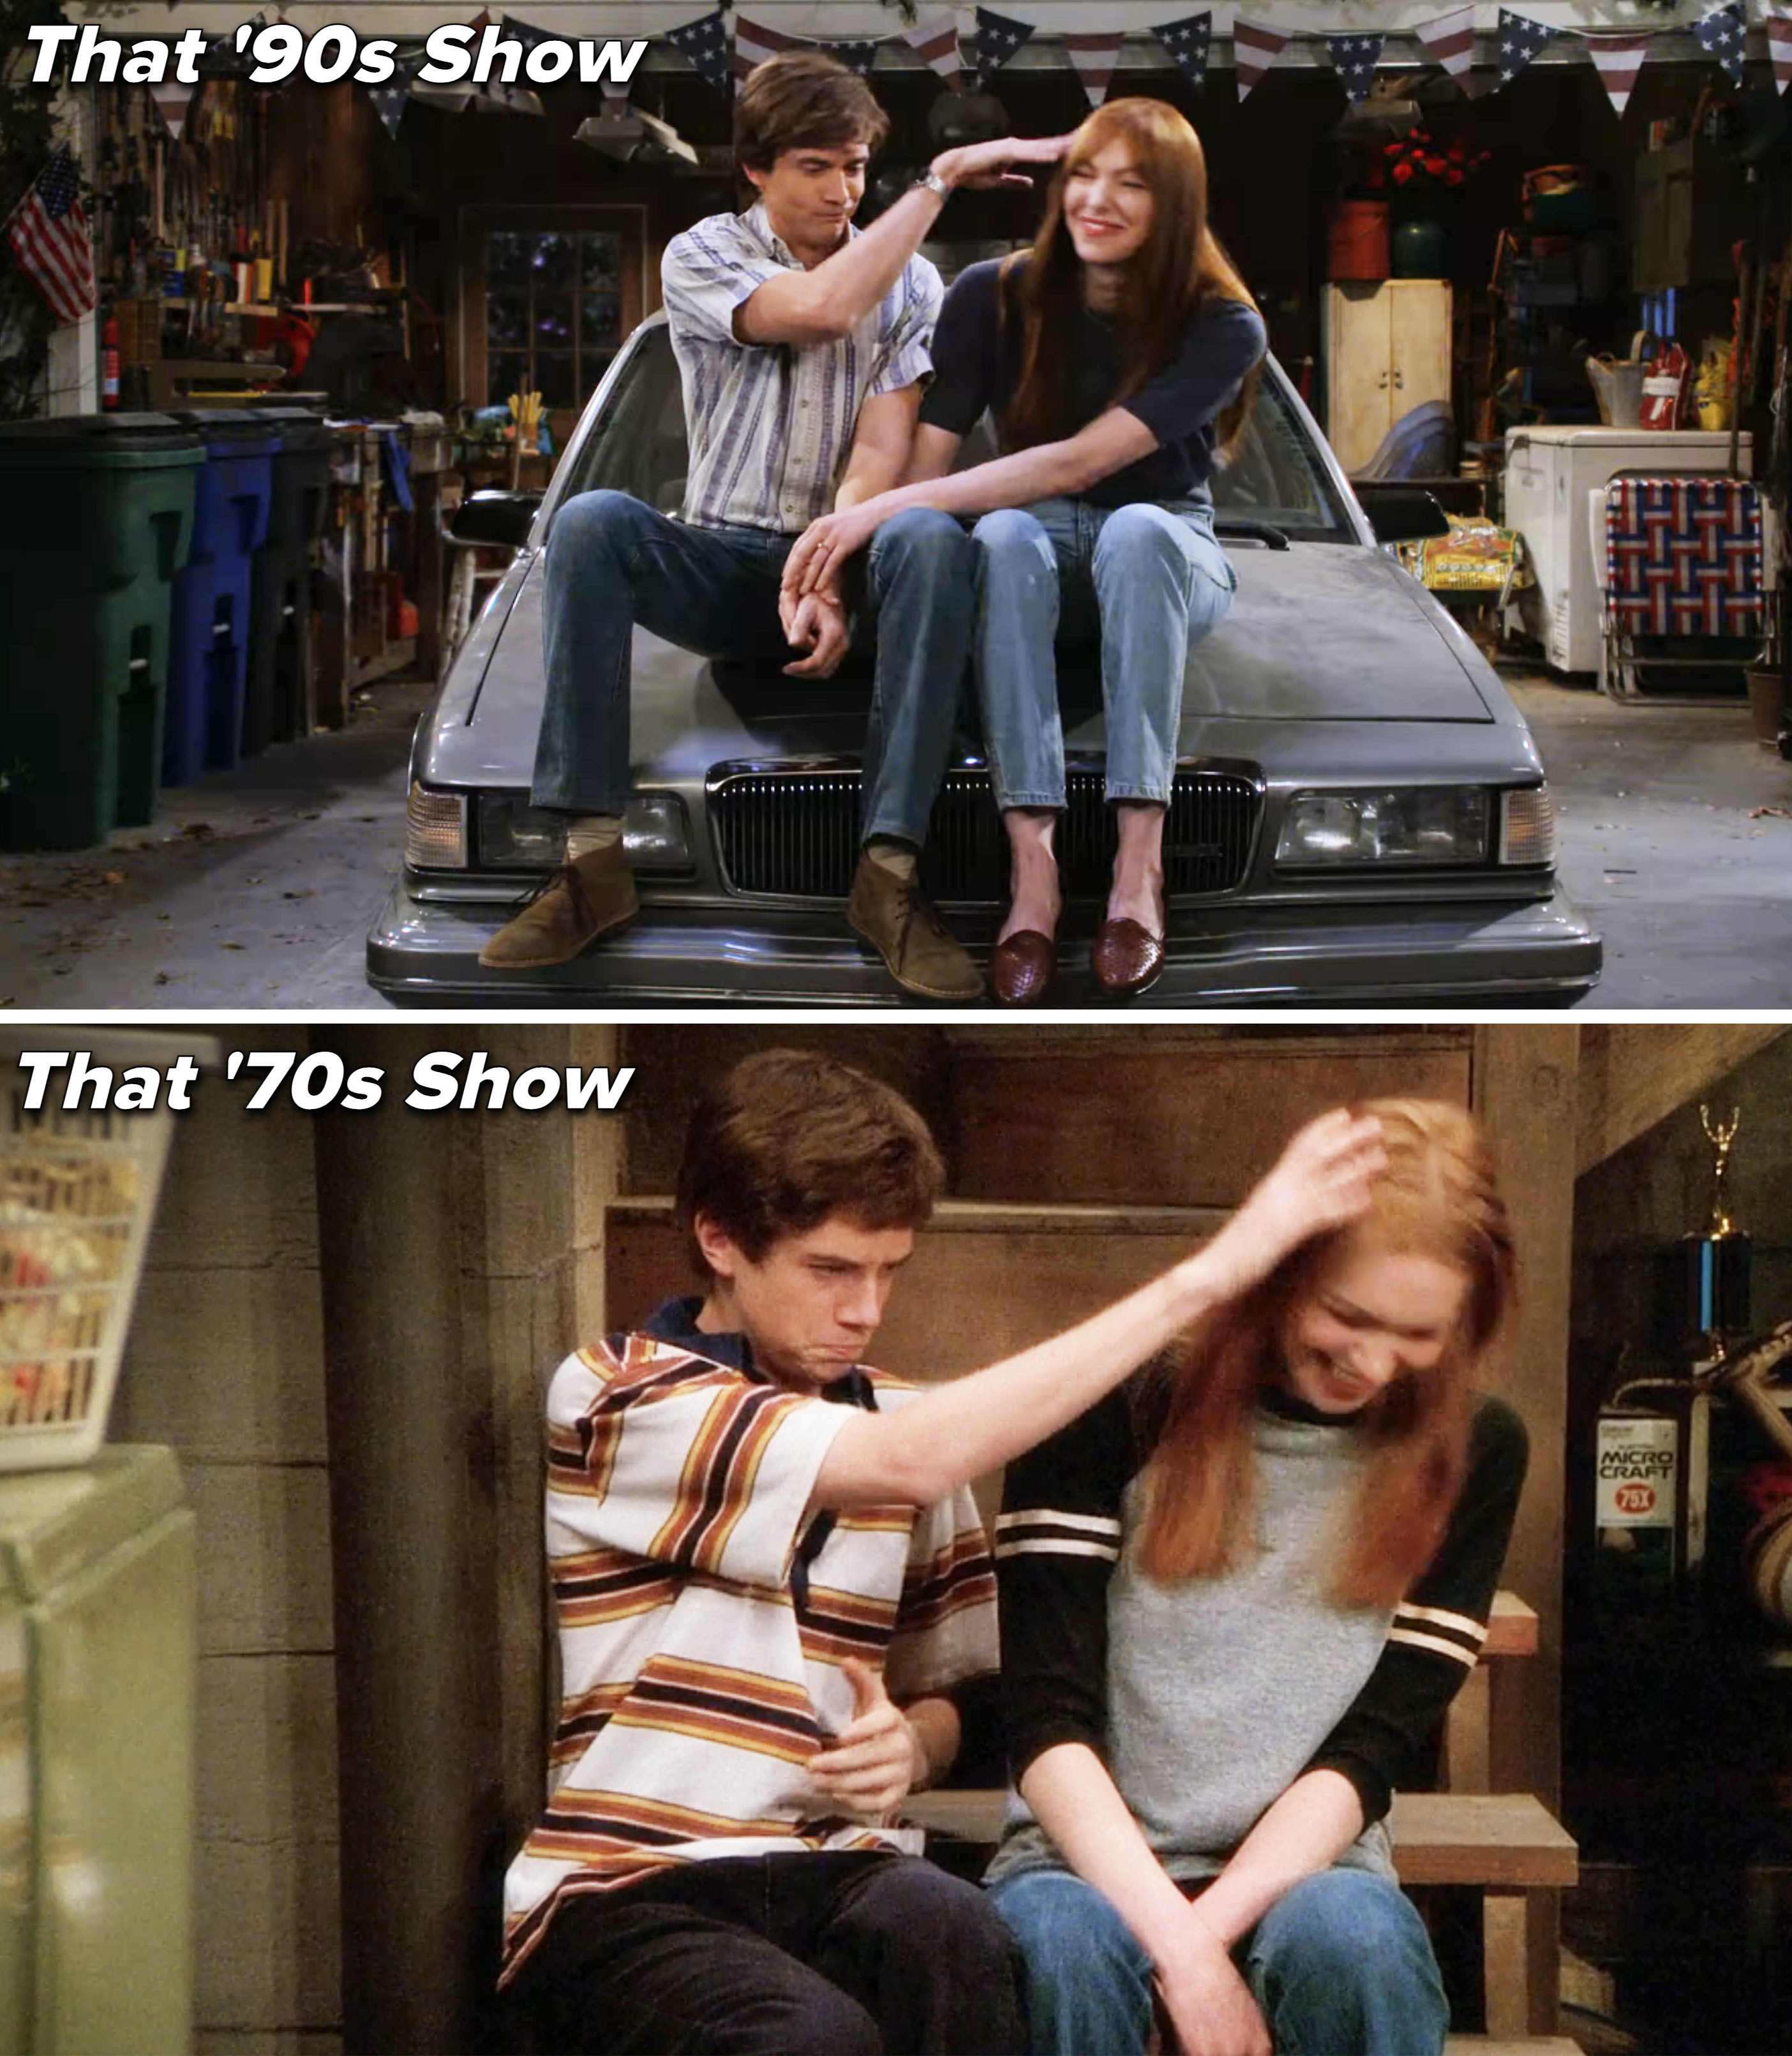 donna that 70s show fakes